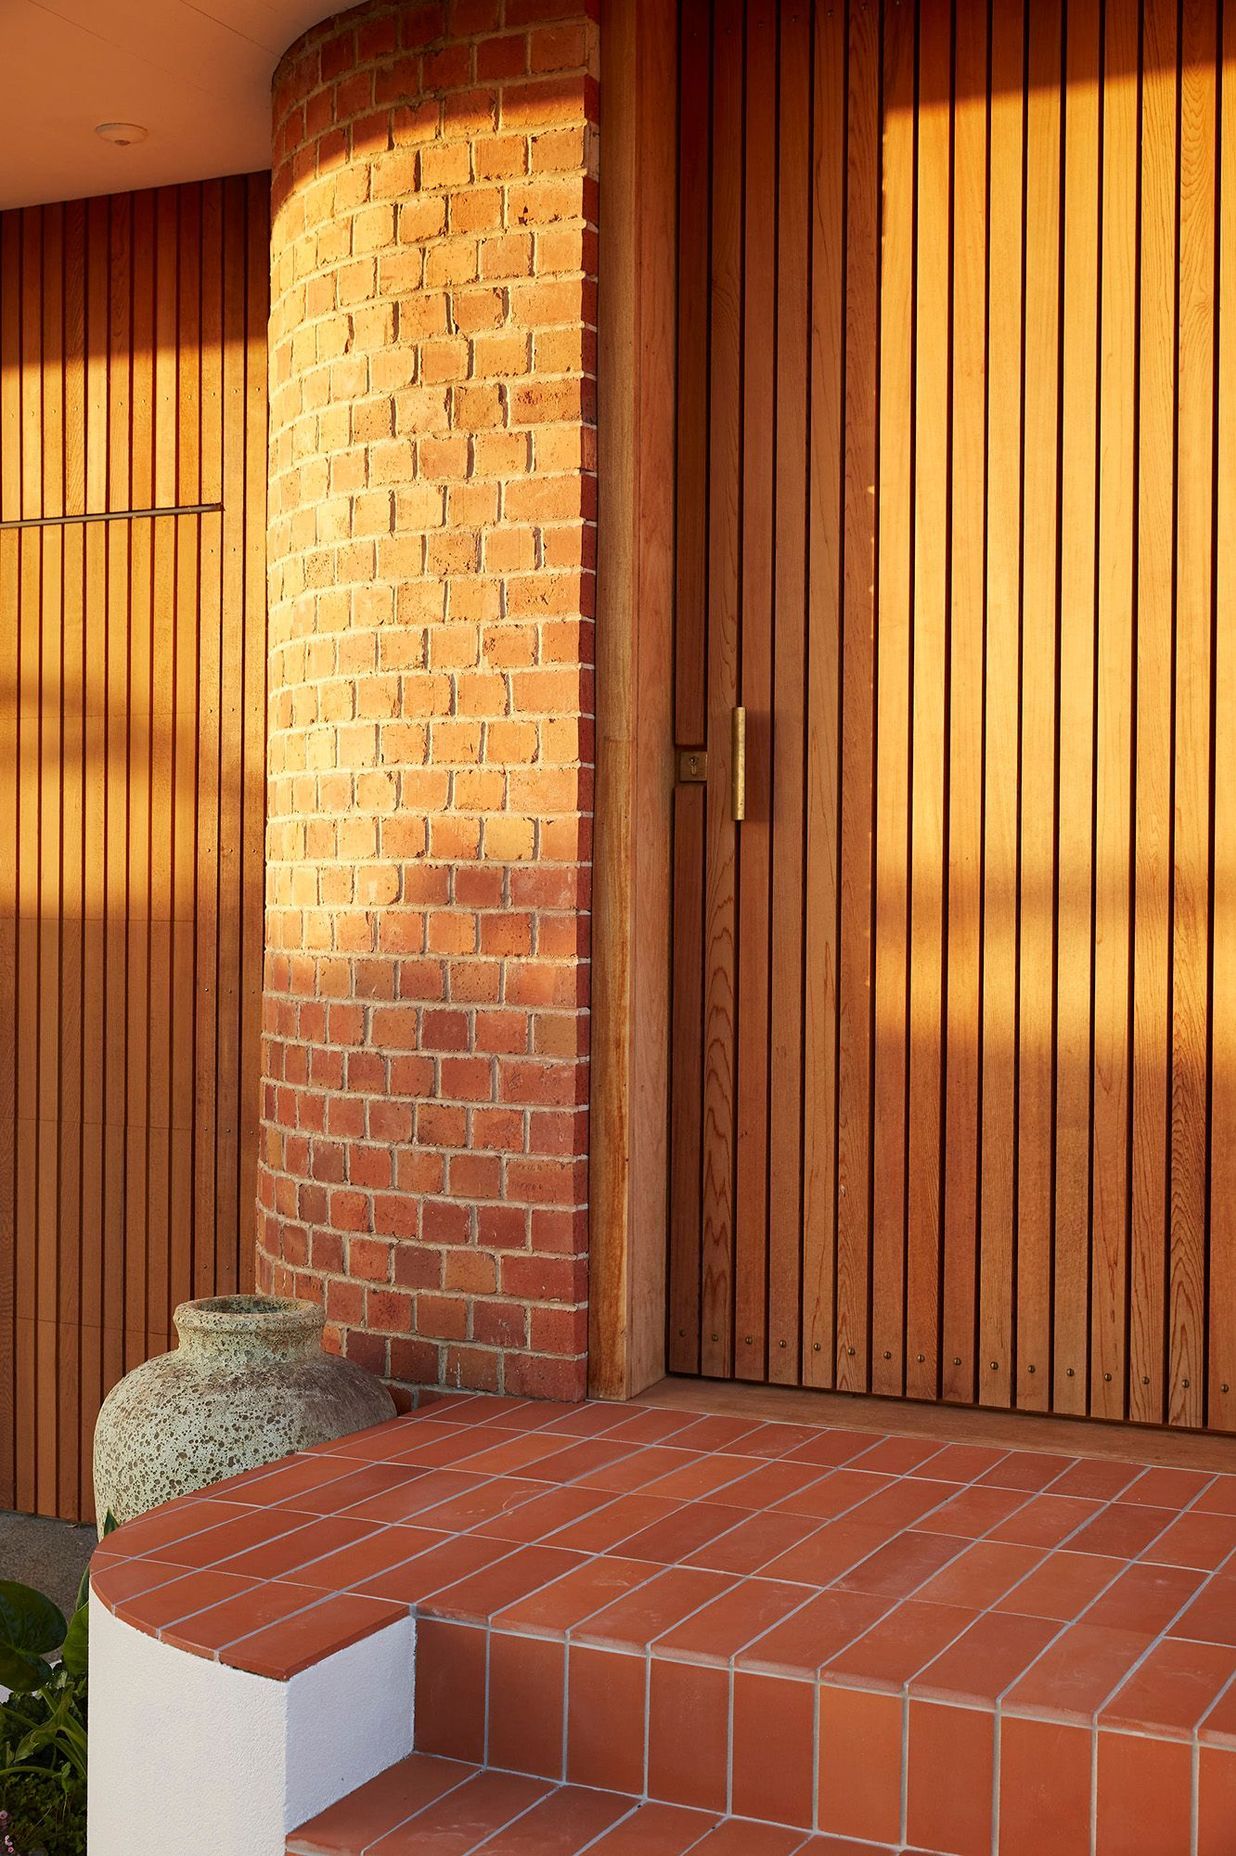 A new entrance punctuates the curved brick of the recently renovated, post-deco Owairaka House, Auckland, by Raukura Turei.